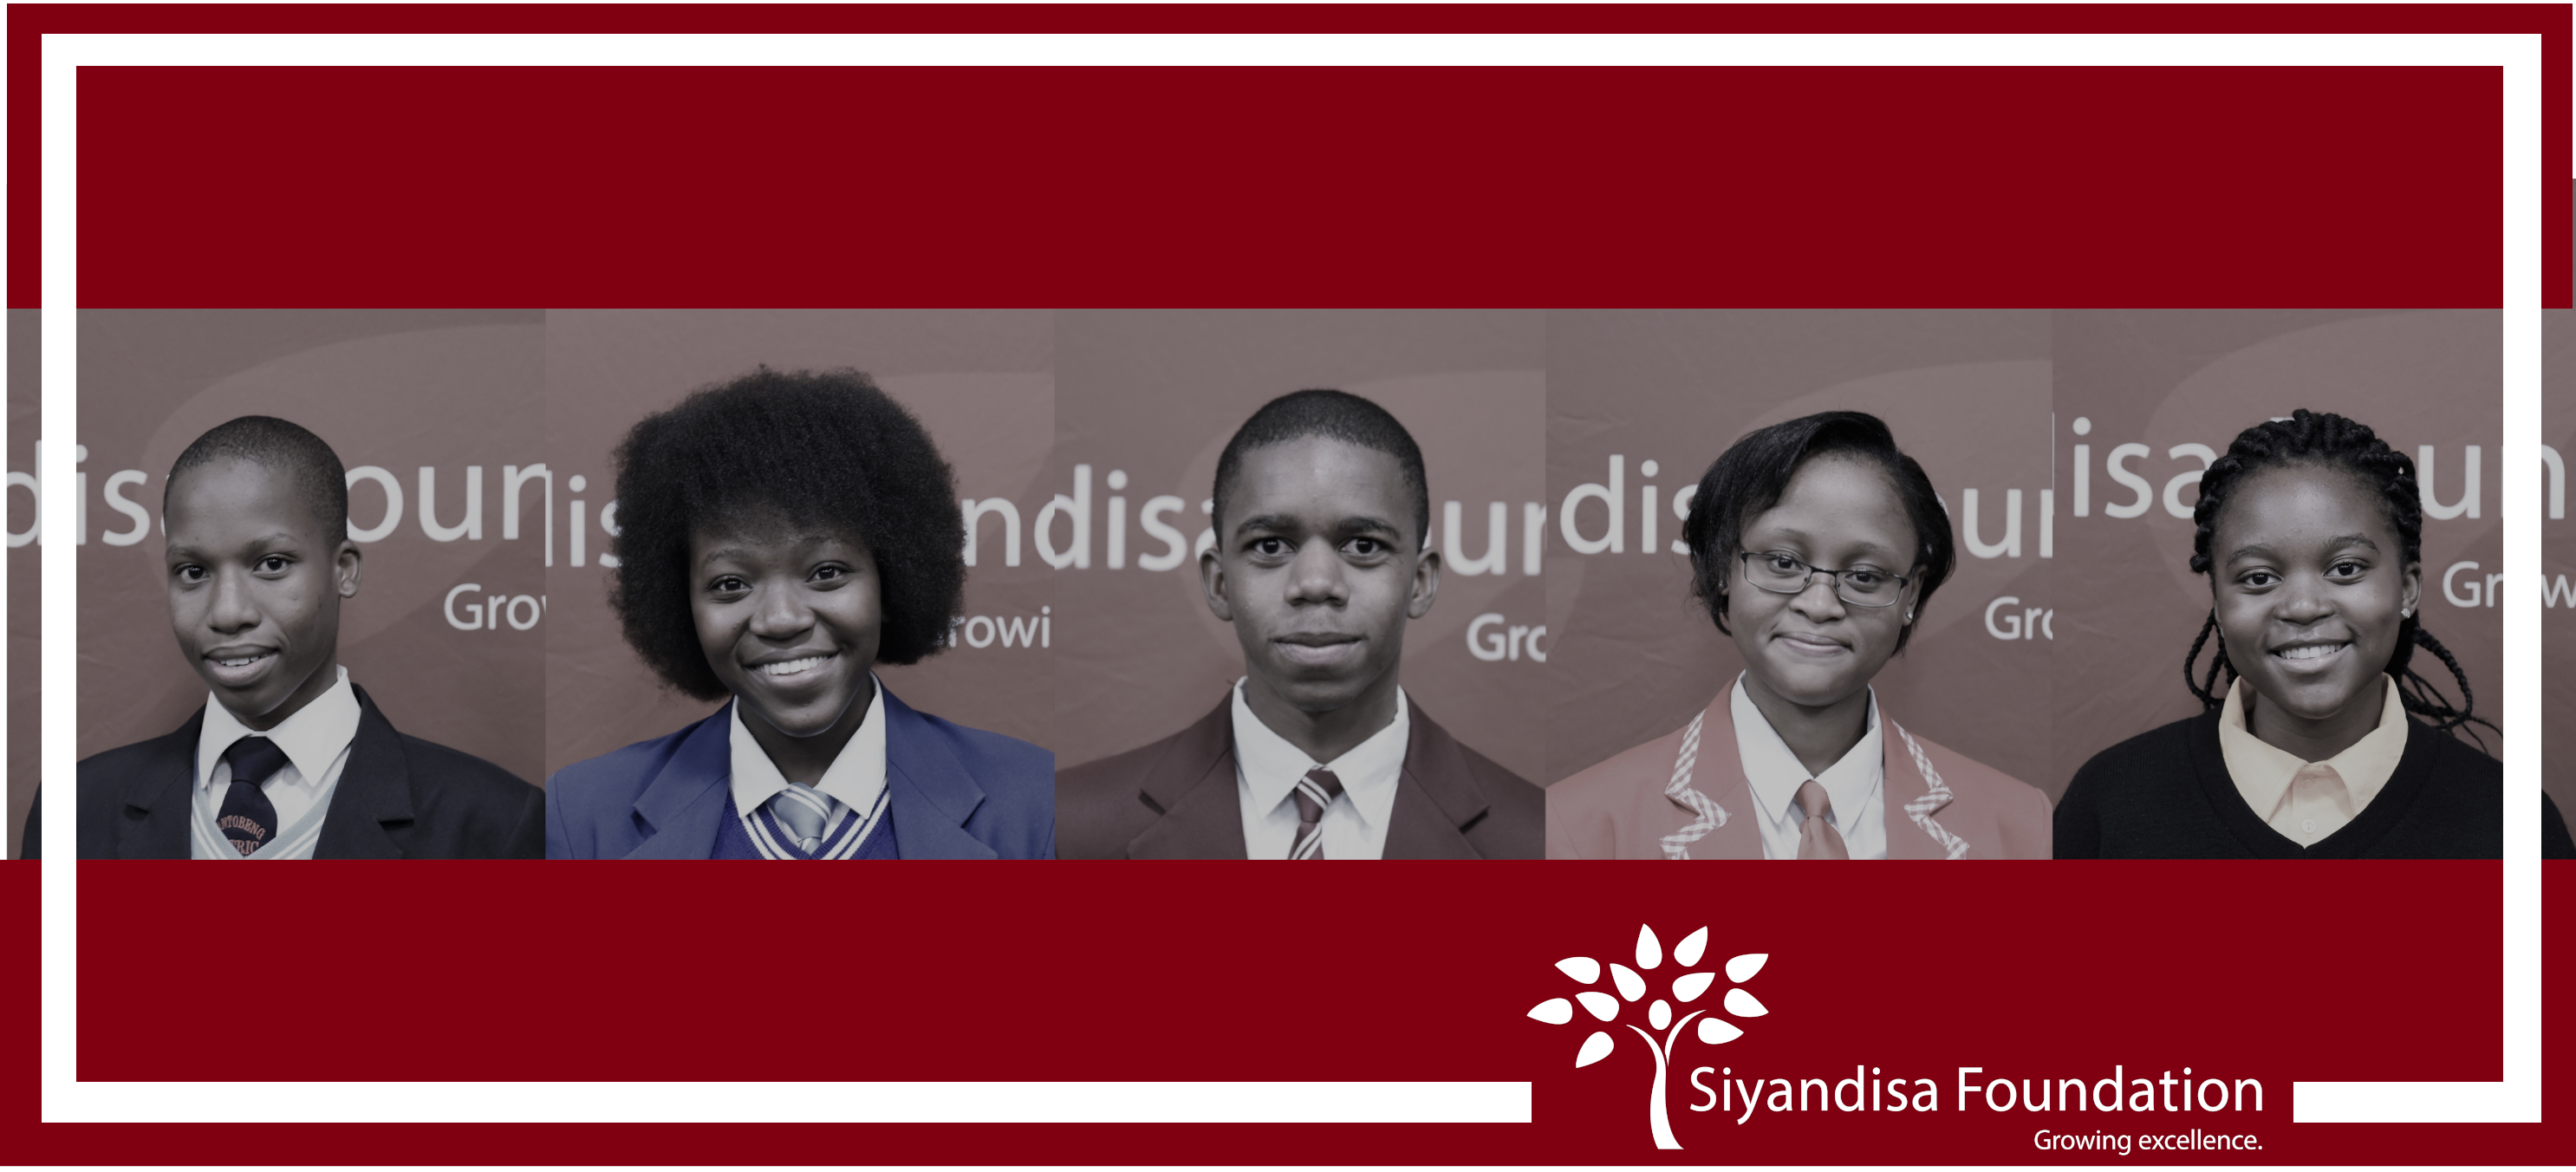 283 distinctions for Siyandisa’s Class of 2019